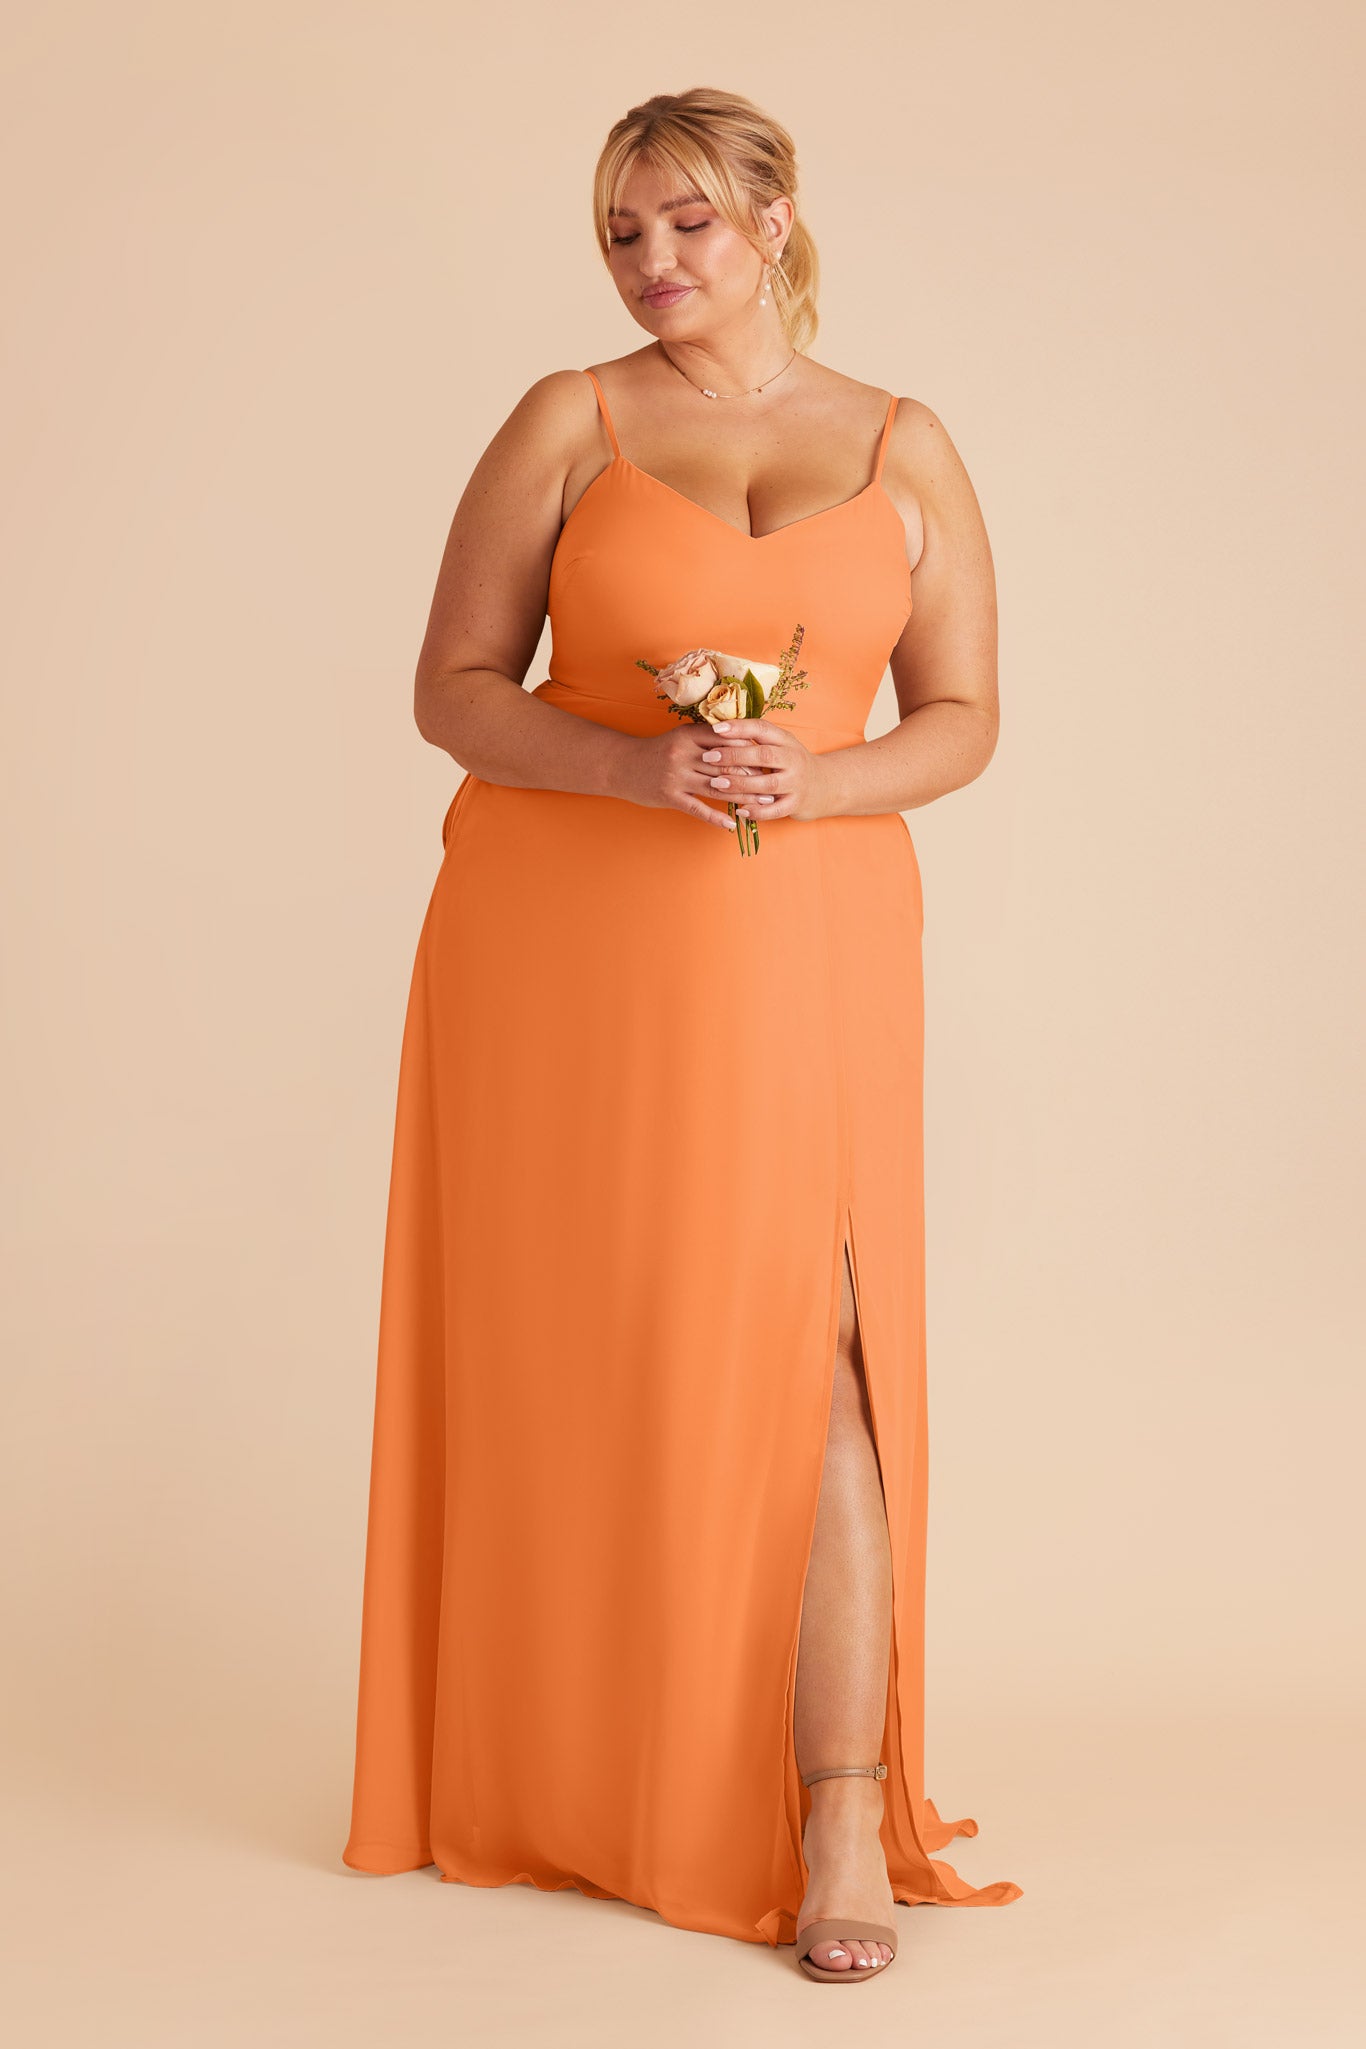 Apricot Devin Convertible Dress by Birdy Grey